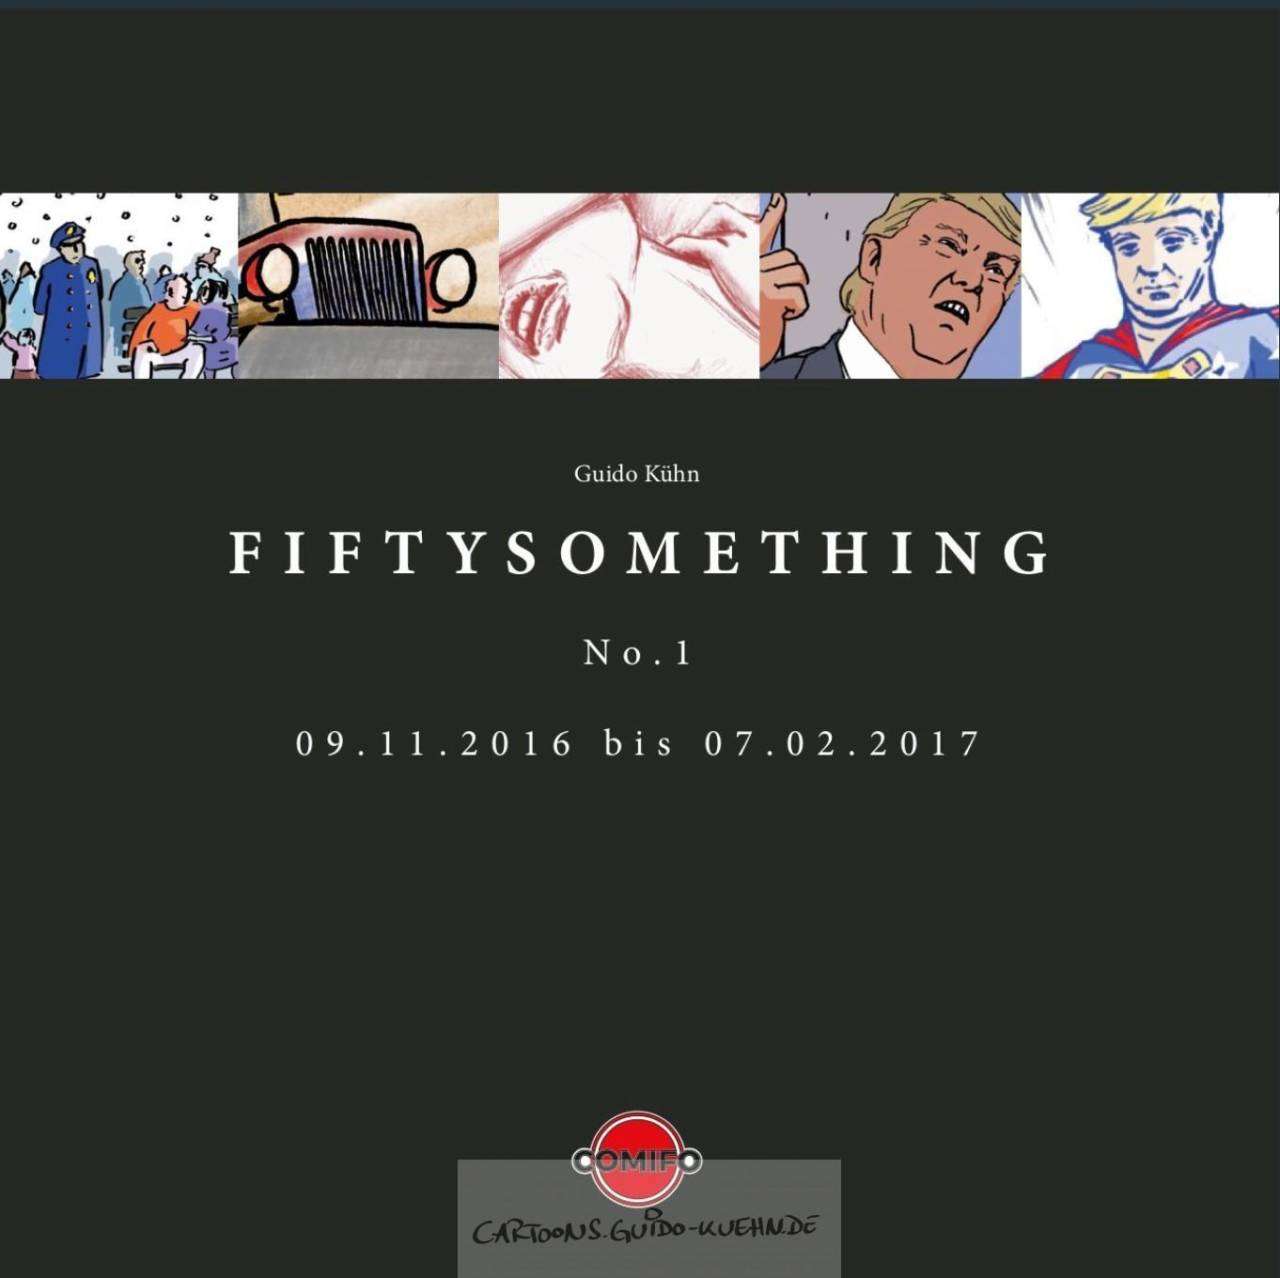 Fiftysomething No. 1